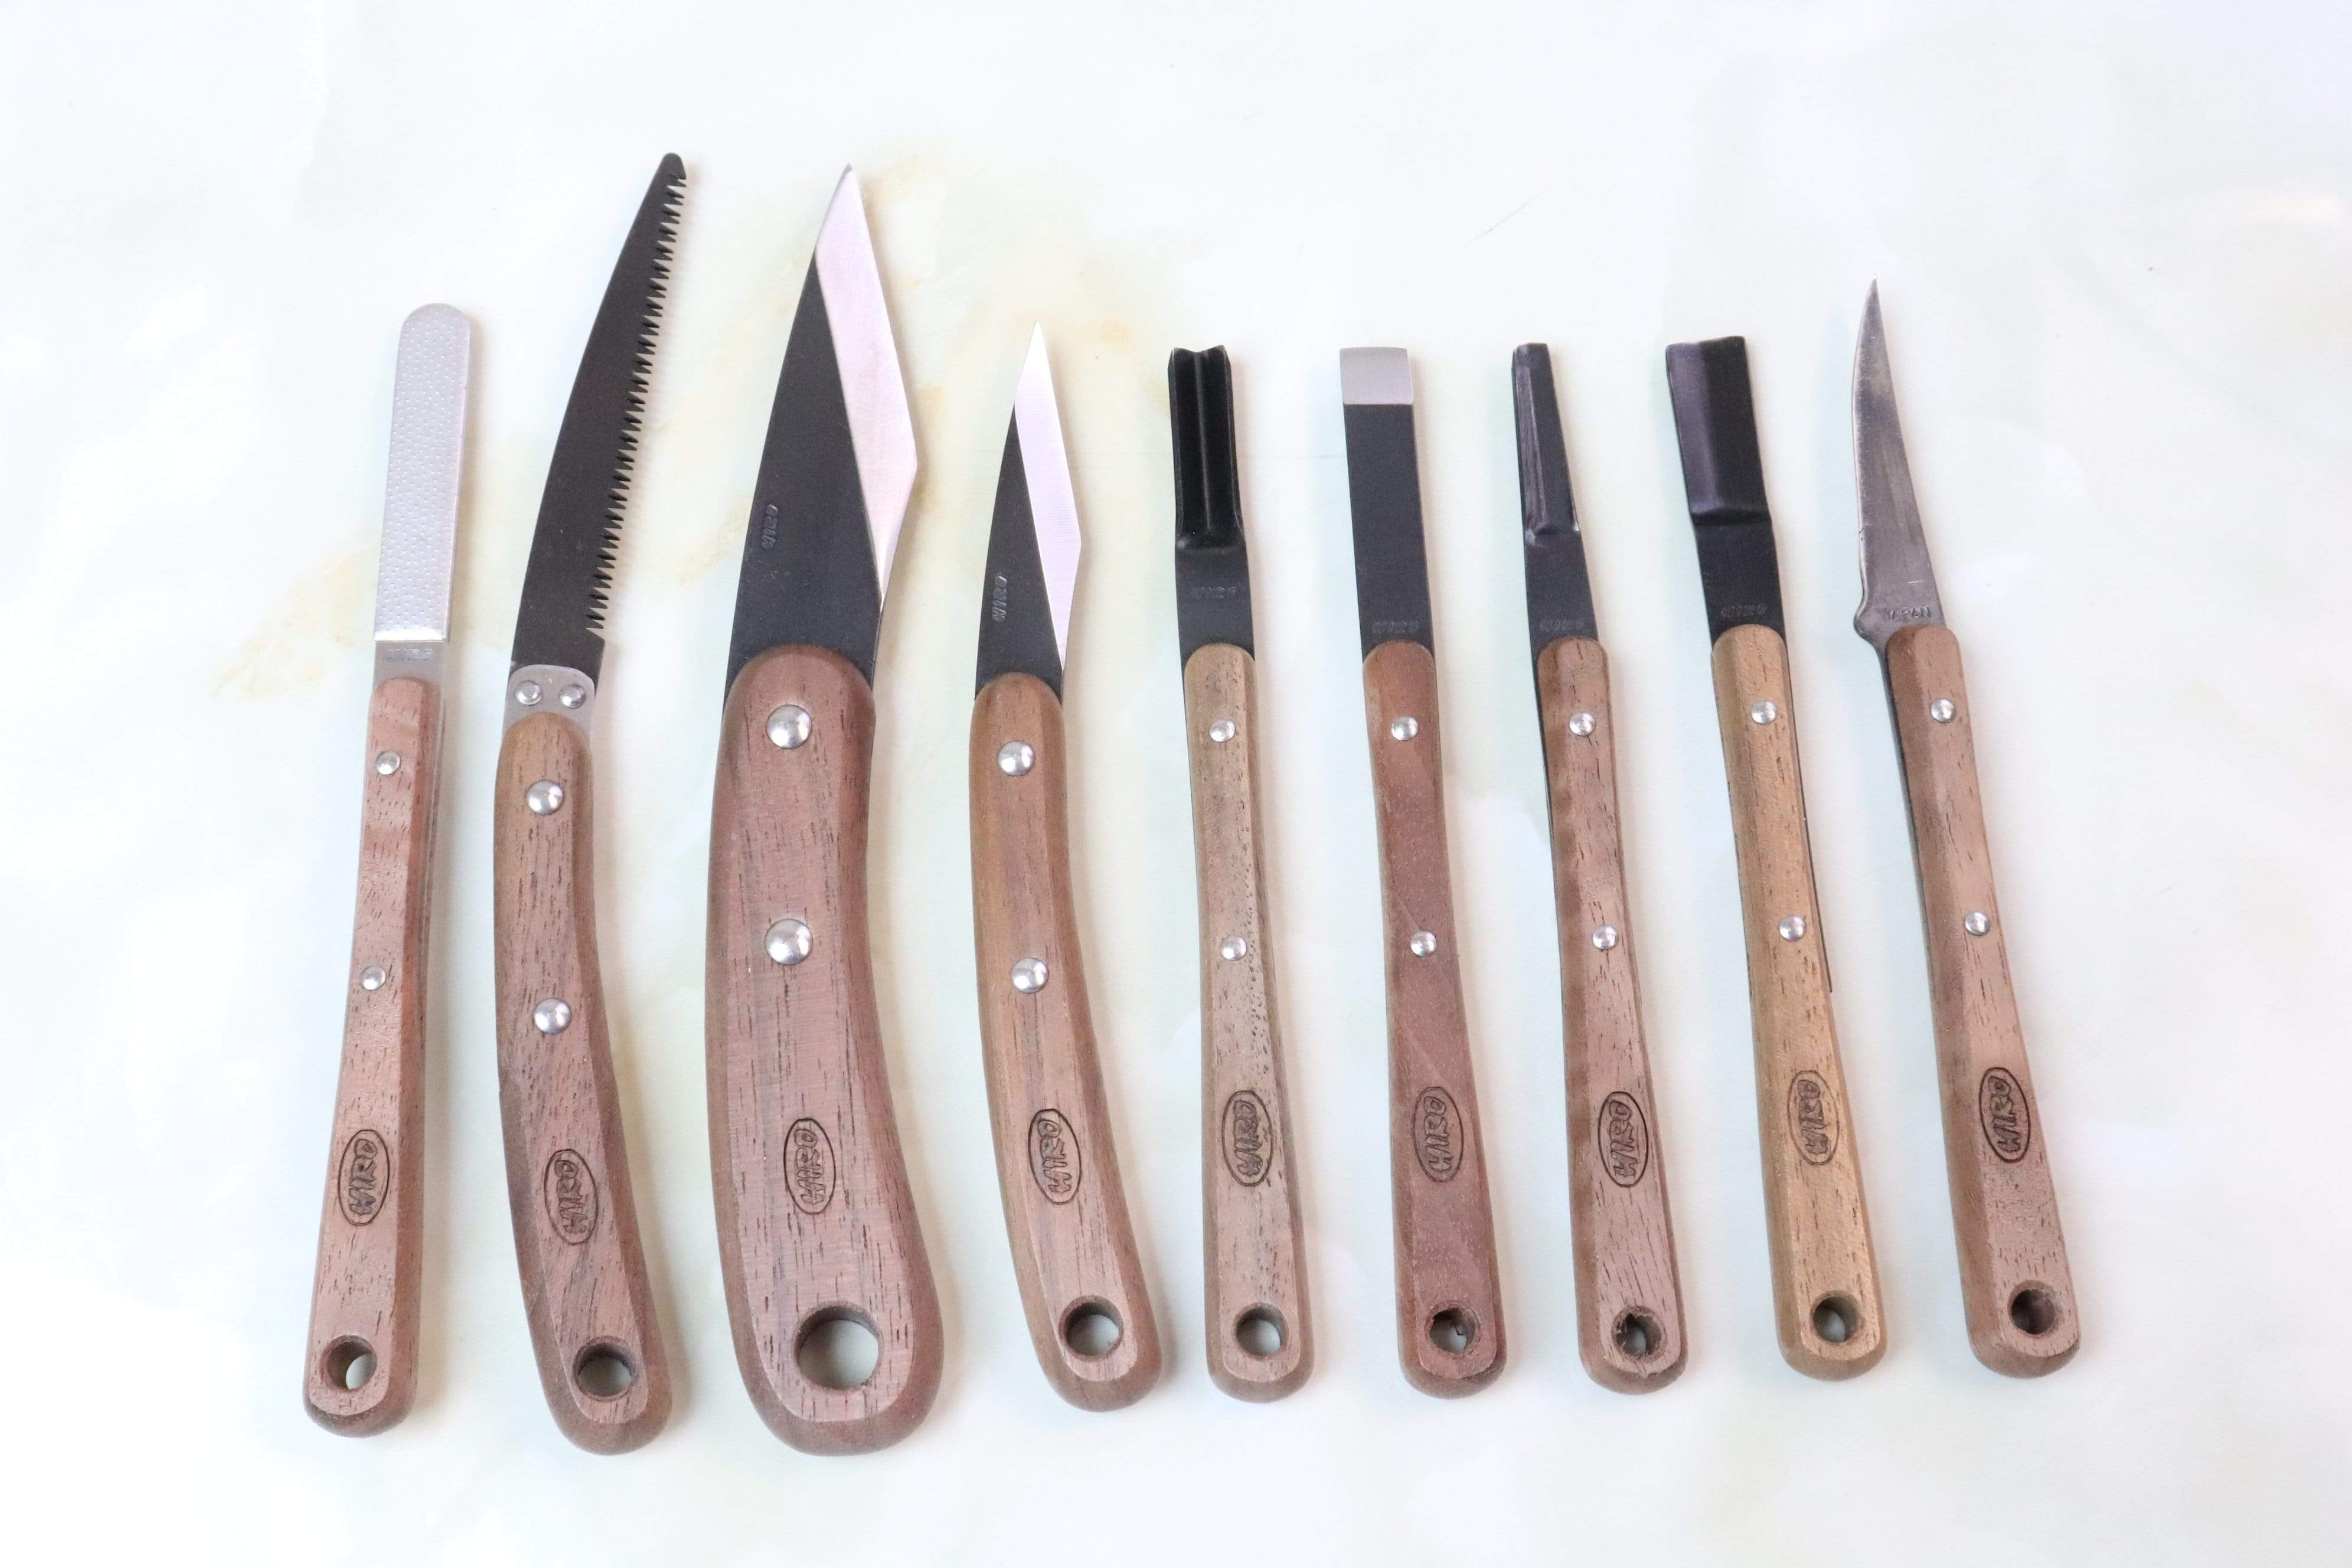 Quality carving/whittling knives with shipping to Europe. : r/whittling